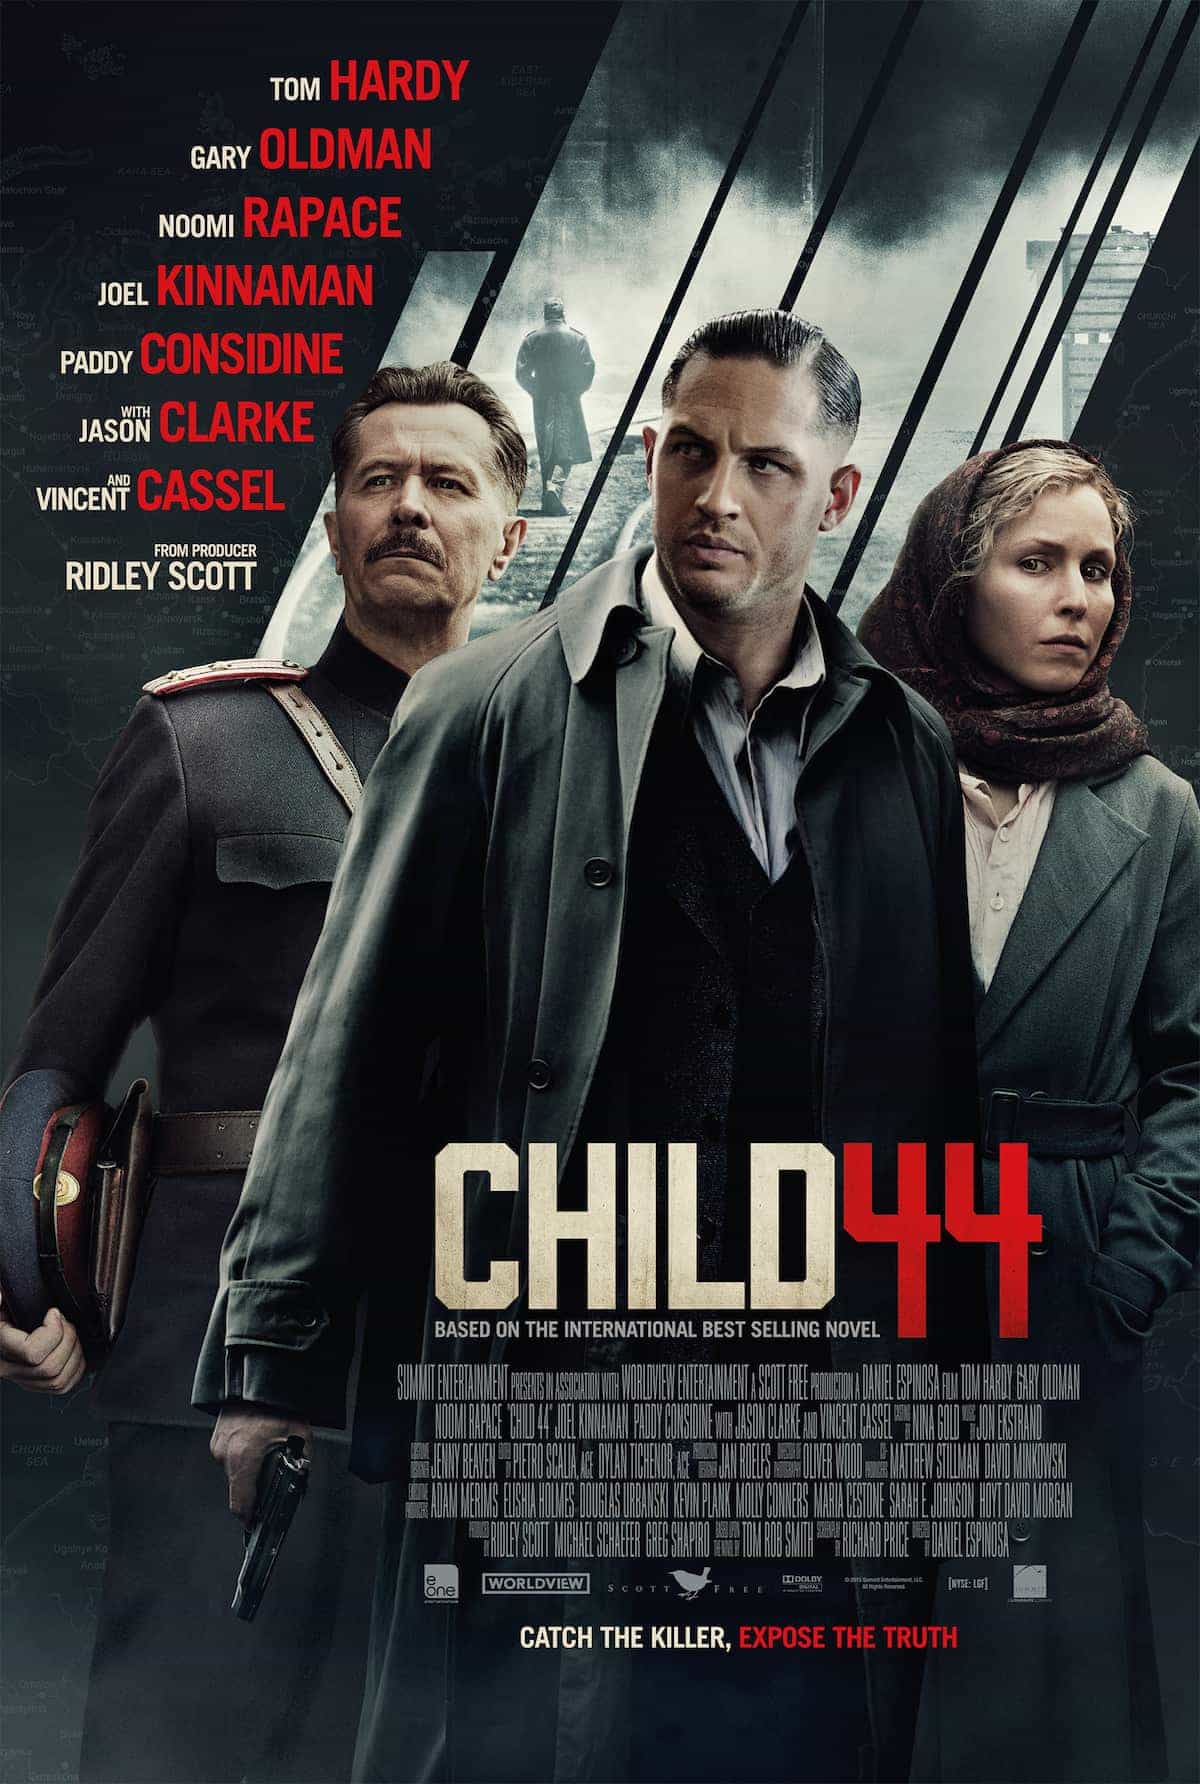 UK Box Office Chart Report 17th April 2015:  Furious 7 makes it 3 while Child 44 is the top new film